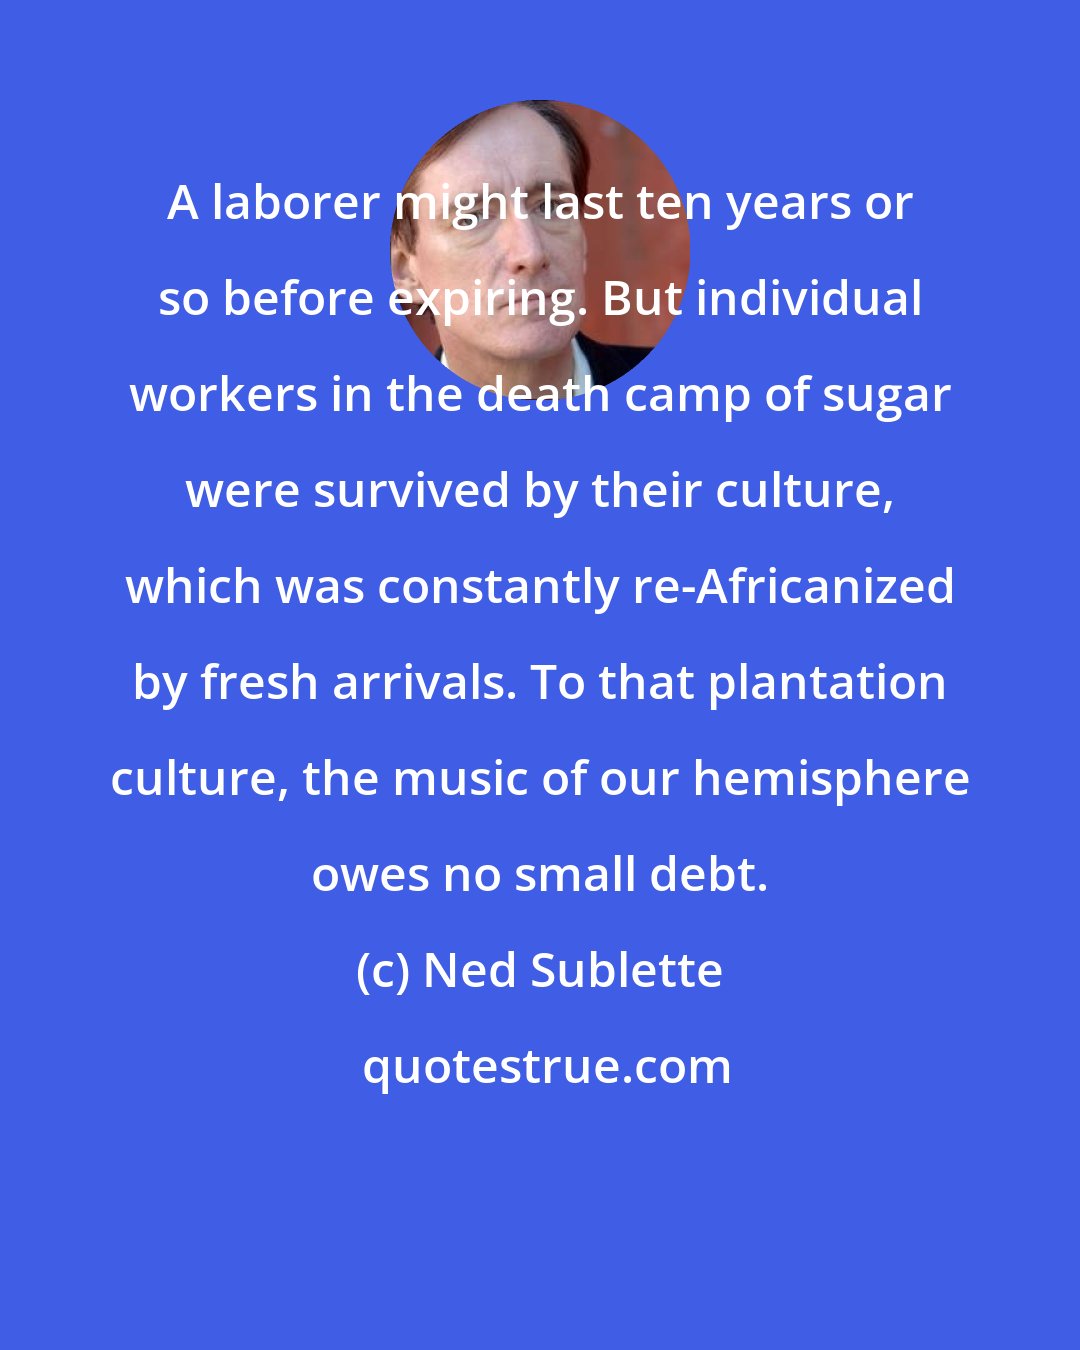 Ned Sublette: A laborer might last ten years or so before expiring. But individual workers in the death camp of sugar were survived by their culture, which was constantly re-Africanized by fresh arrivals. To that plantation culture, the music of our hemisphere owes no small debt.